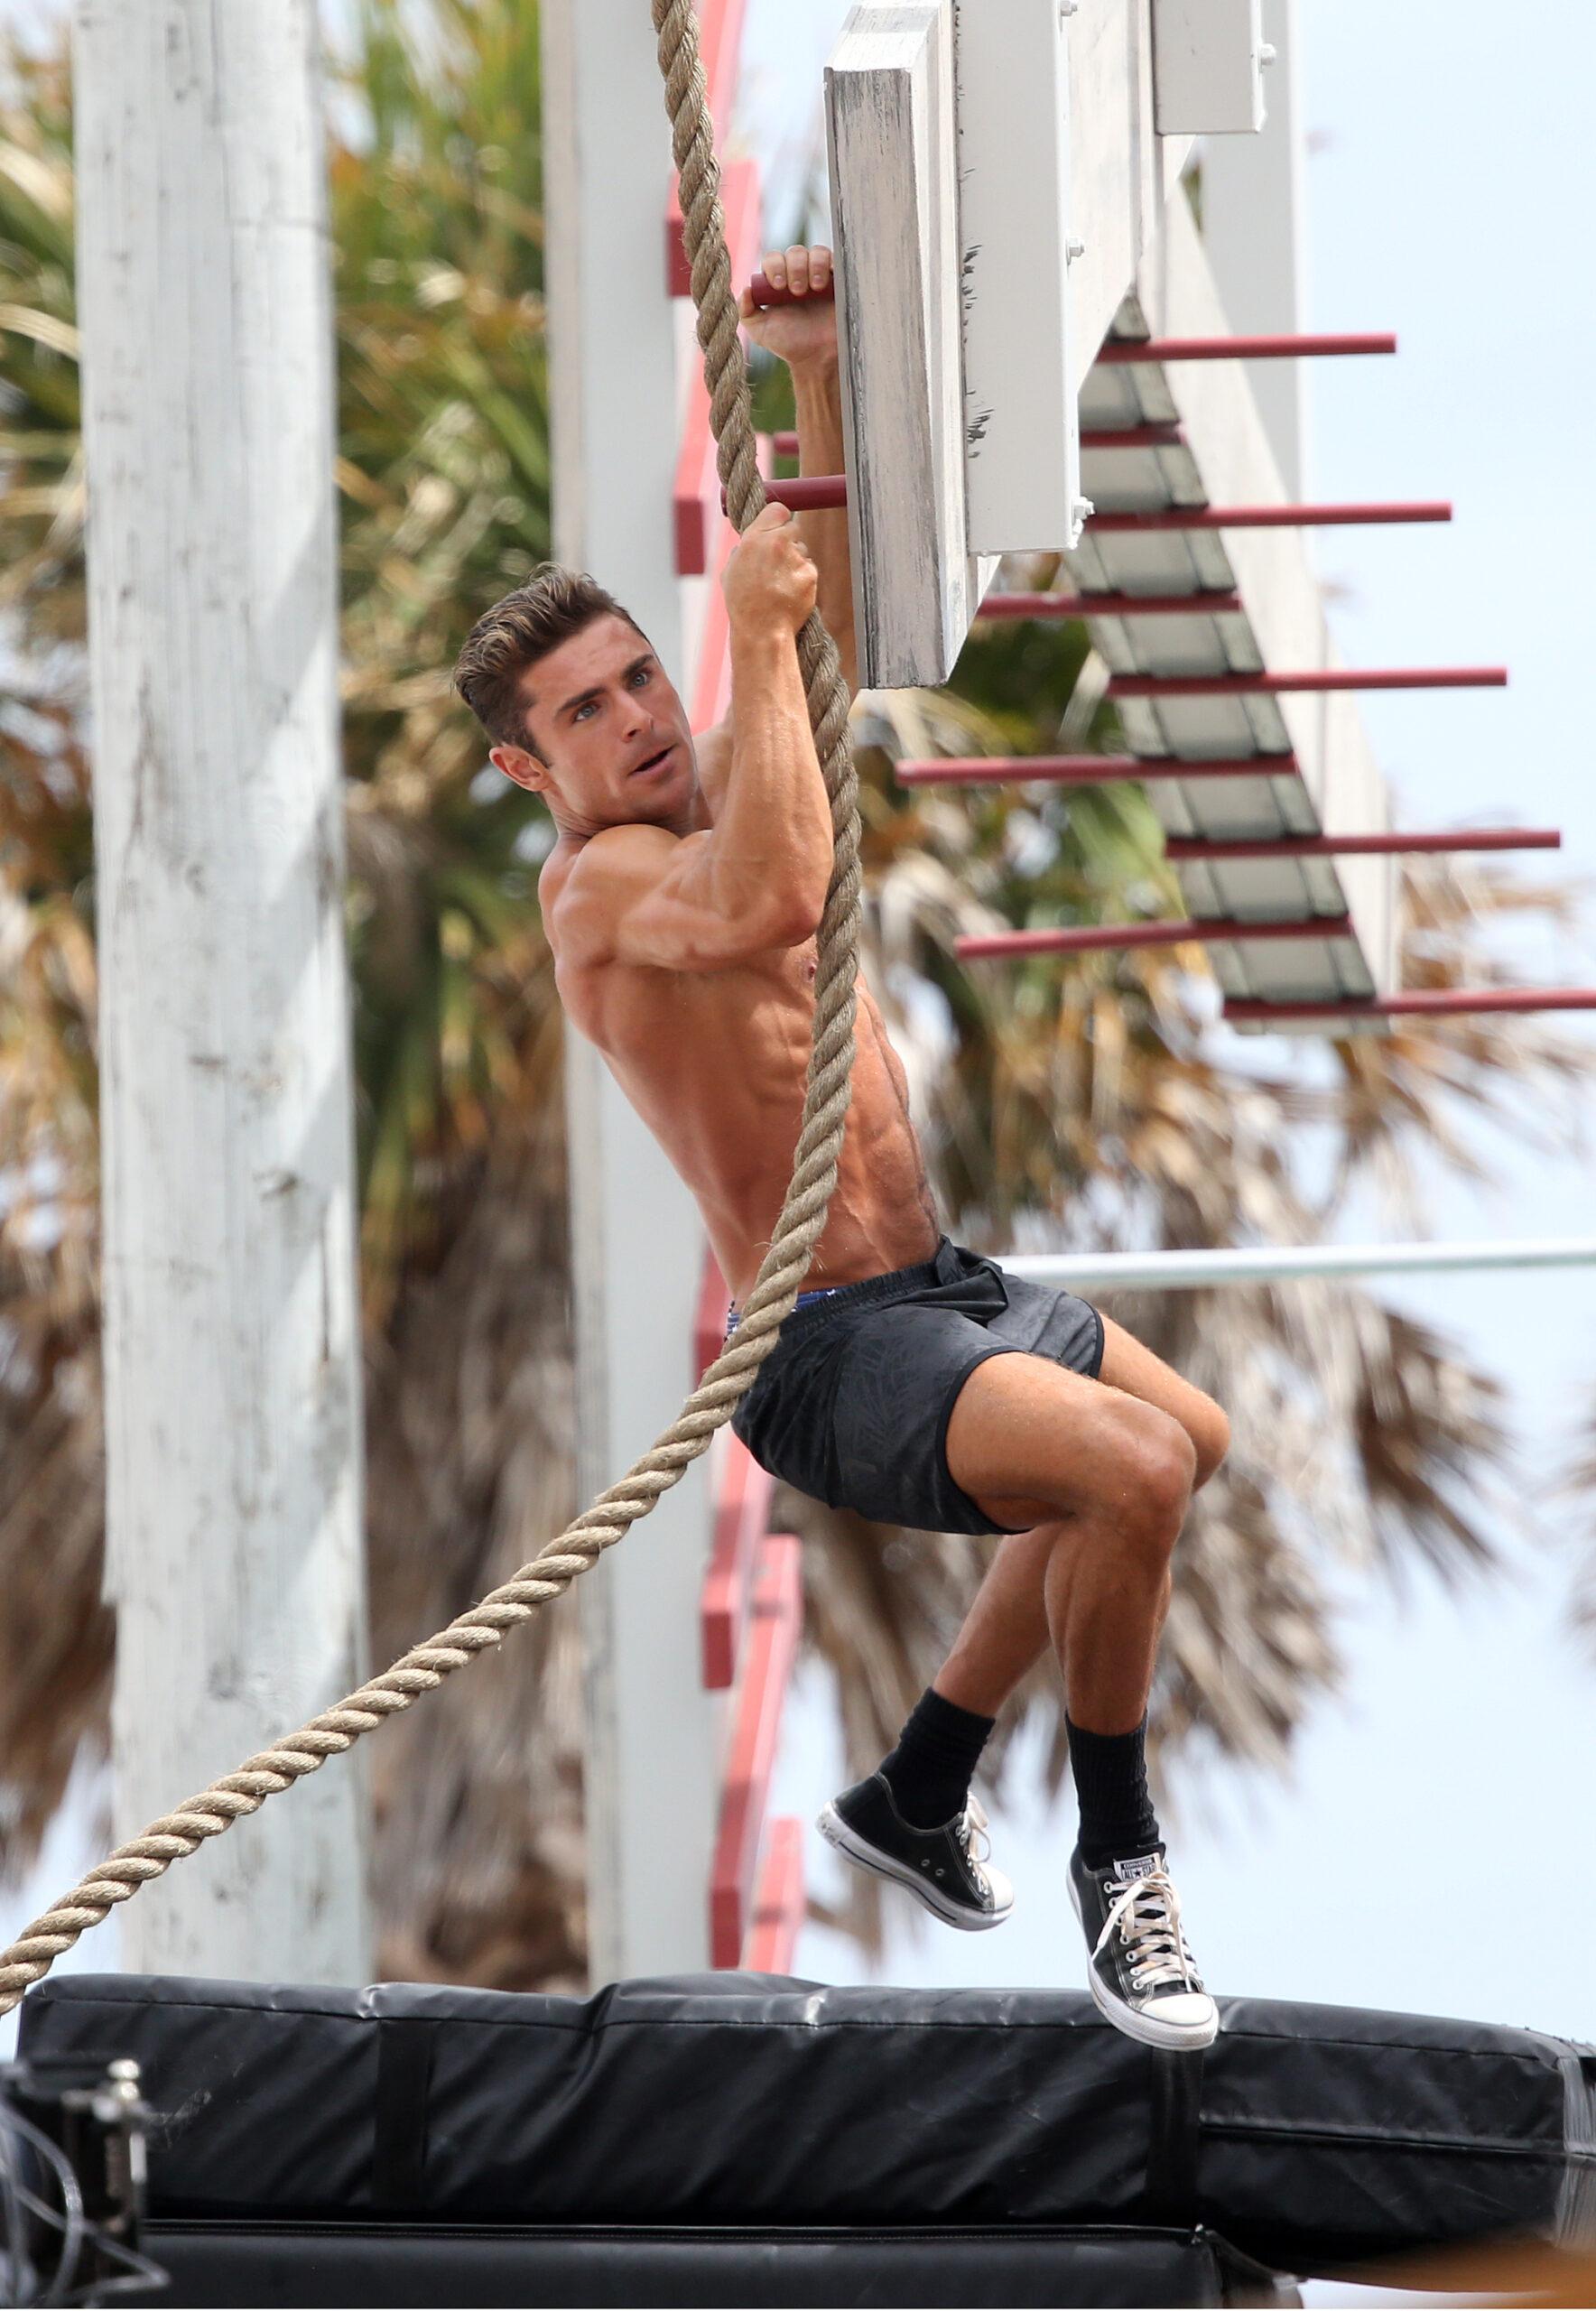 Zac Efron shows off his incredible muscular physique on an obstacle course while filming scenes for the movie Baywatch